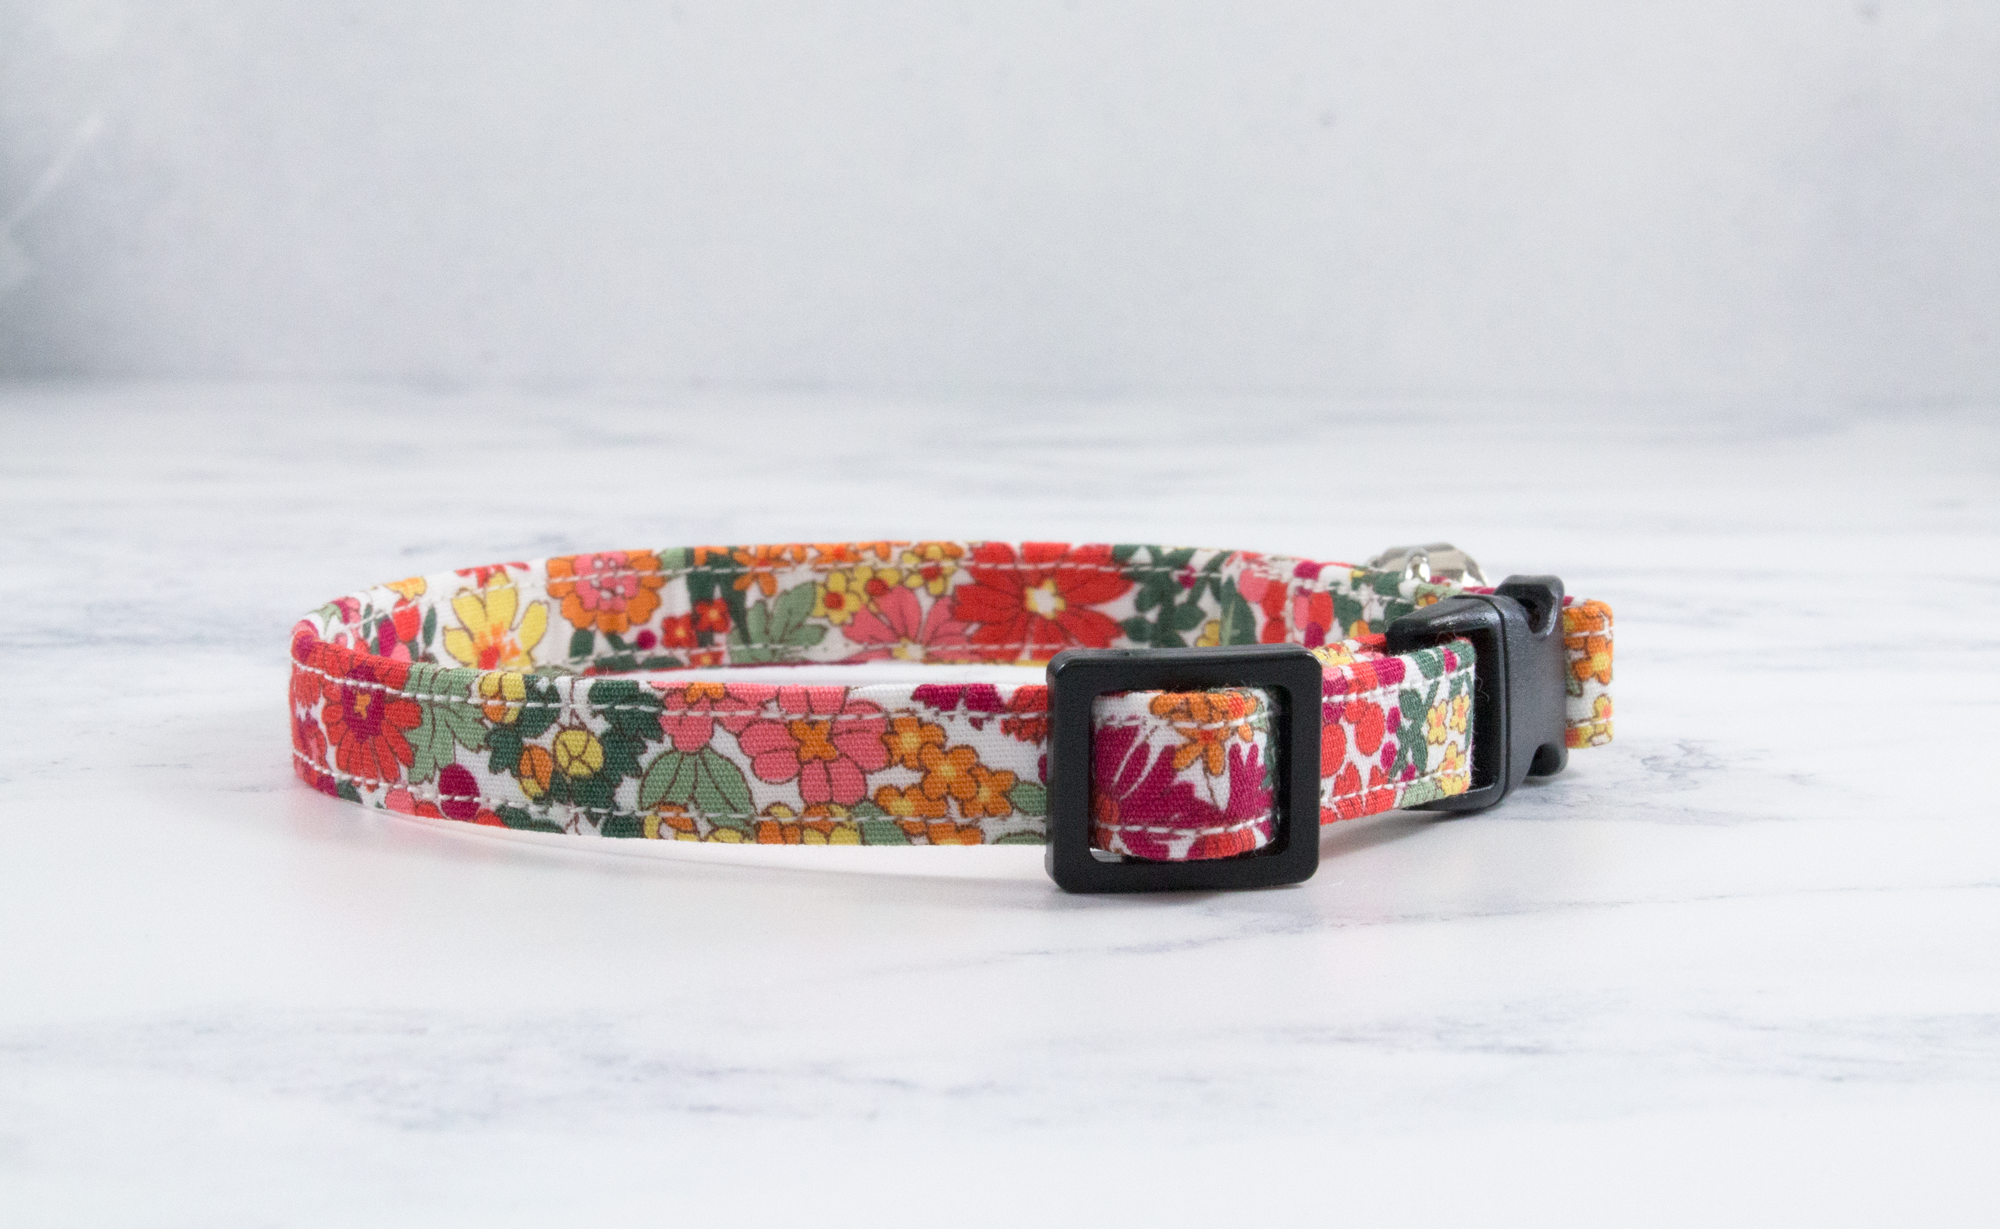 Cat Collar handmade using Floral patterned fabric